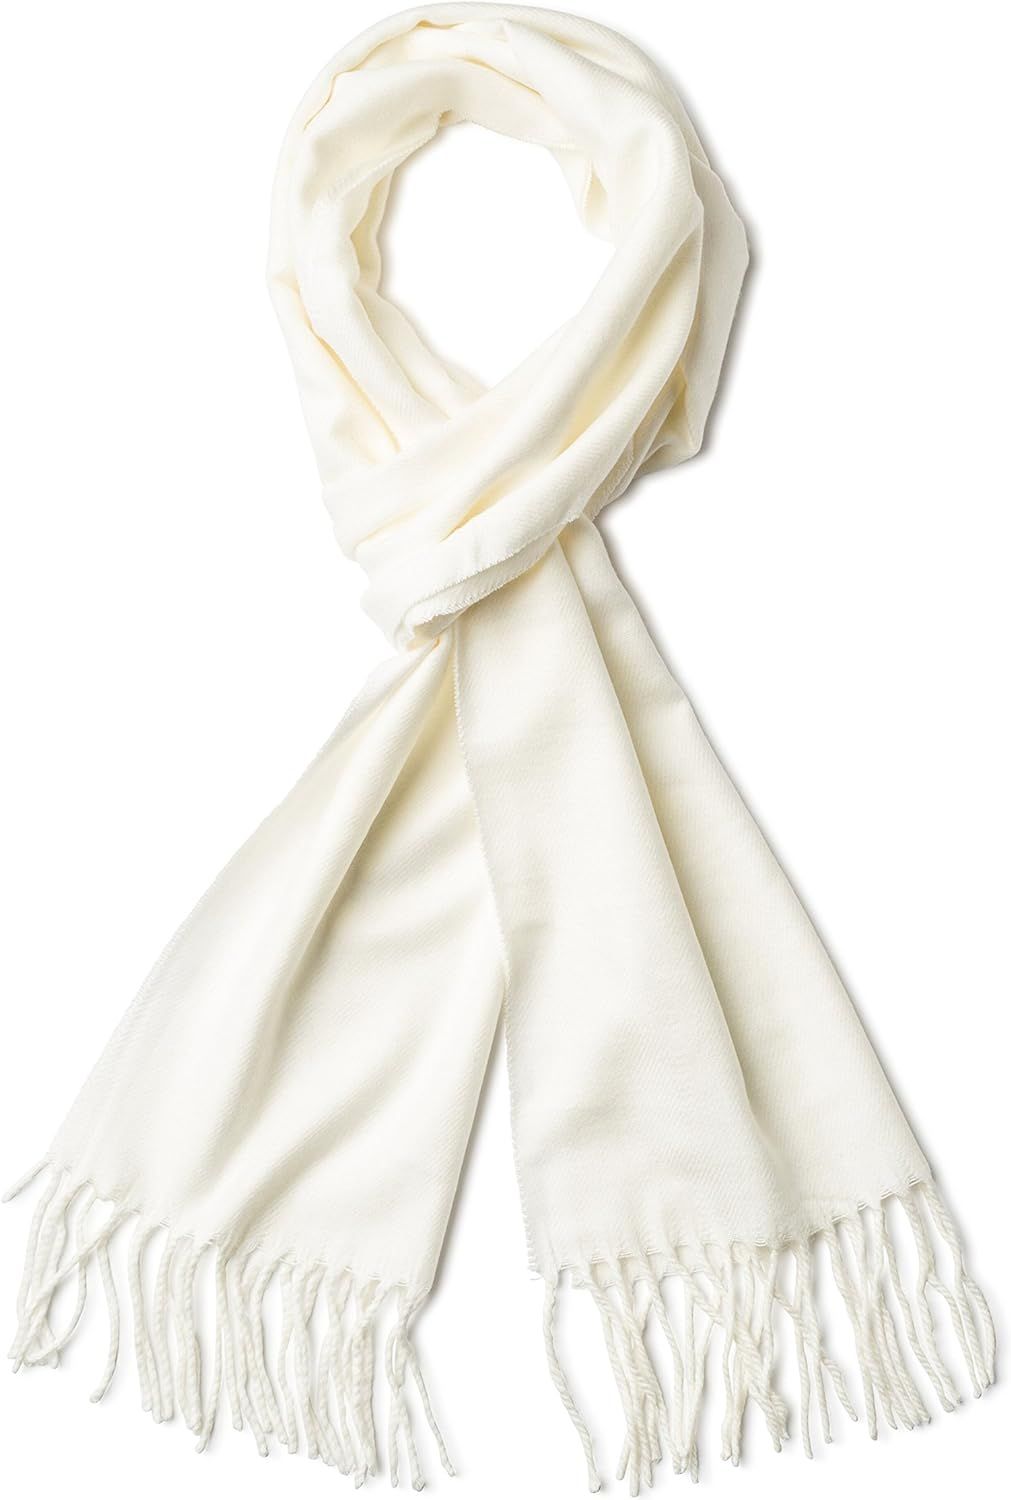 VERONZ Super Soft Luxurious Classic Cashmere Feel Winter Scarf With Gift Box | Amazon (US)